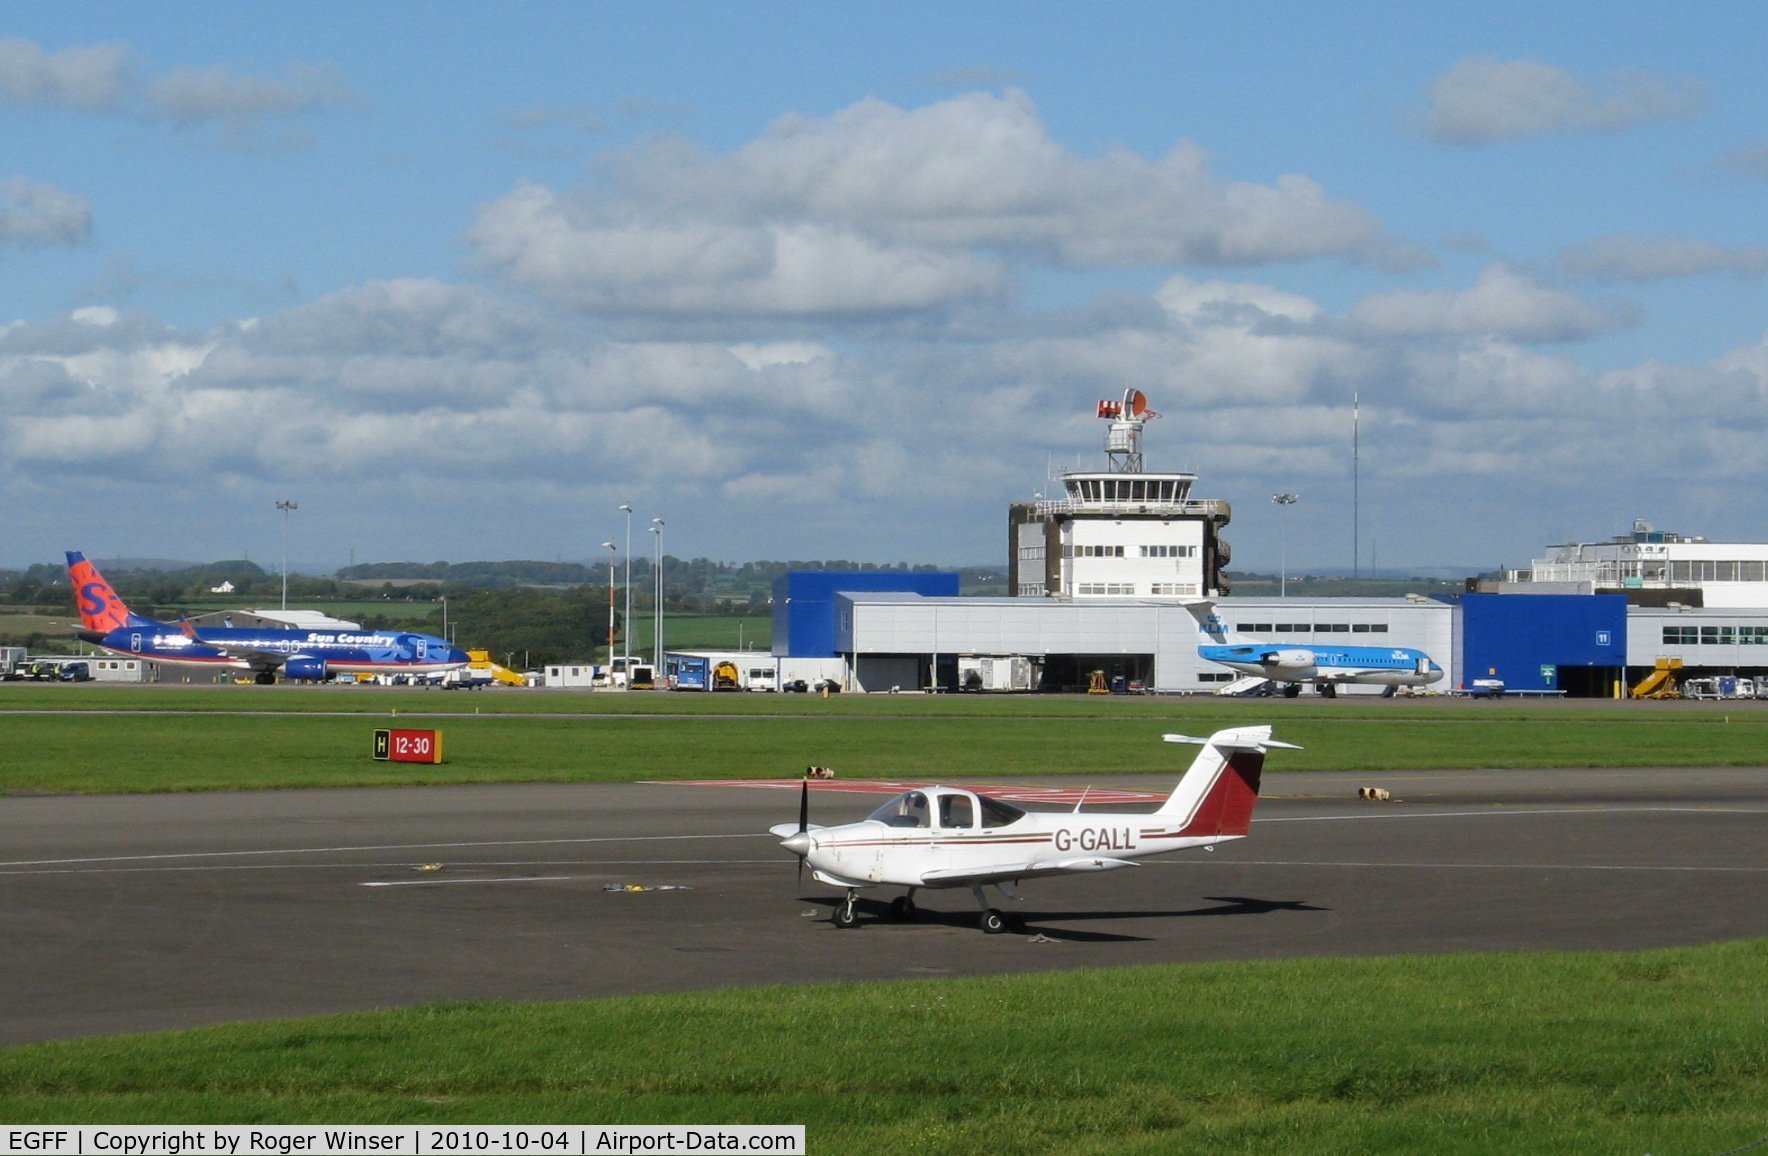 Cardiff International Airport, Cardiff, Wales United Kingdom (EGFF) - View towards the control tower